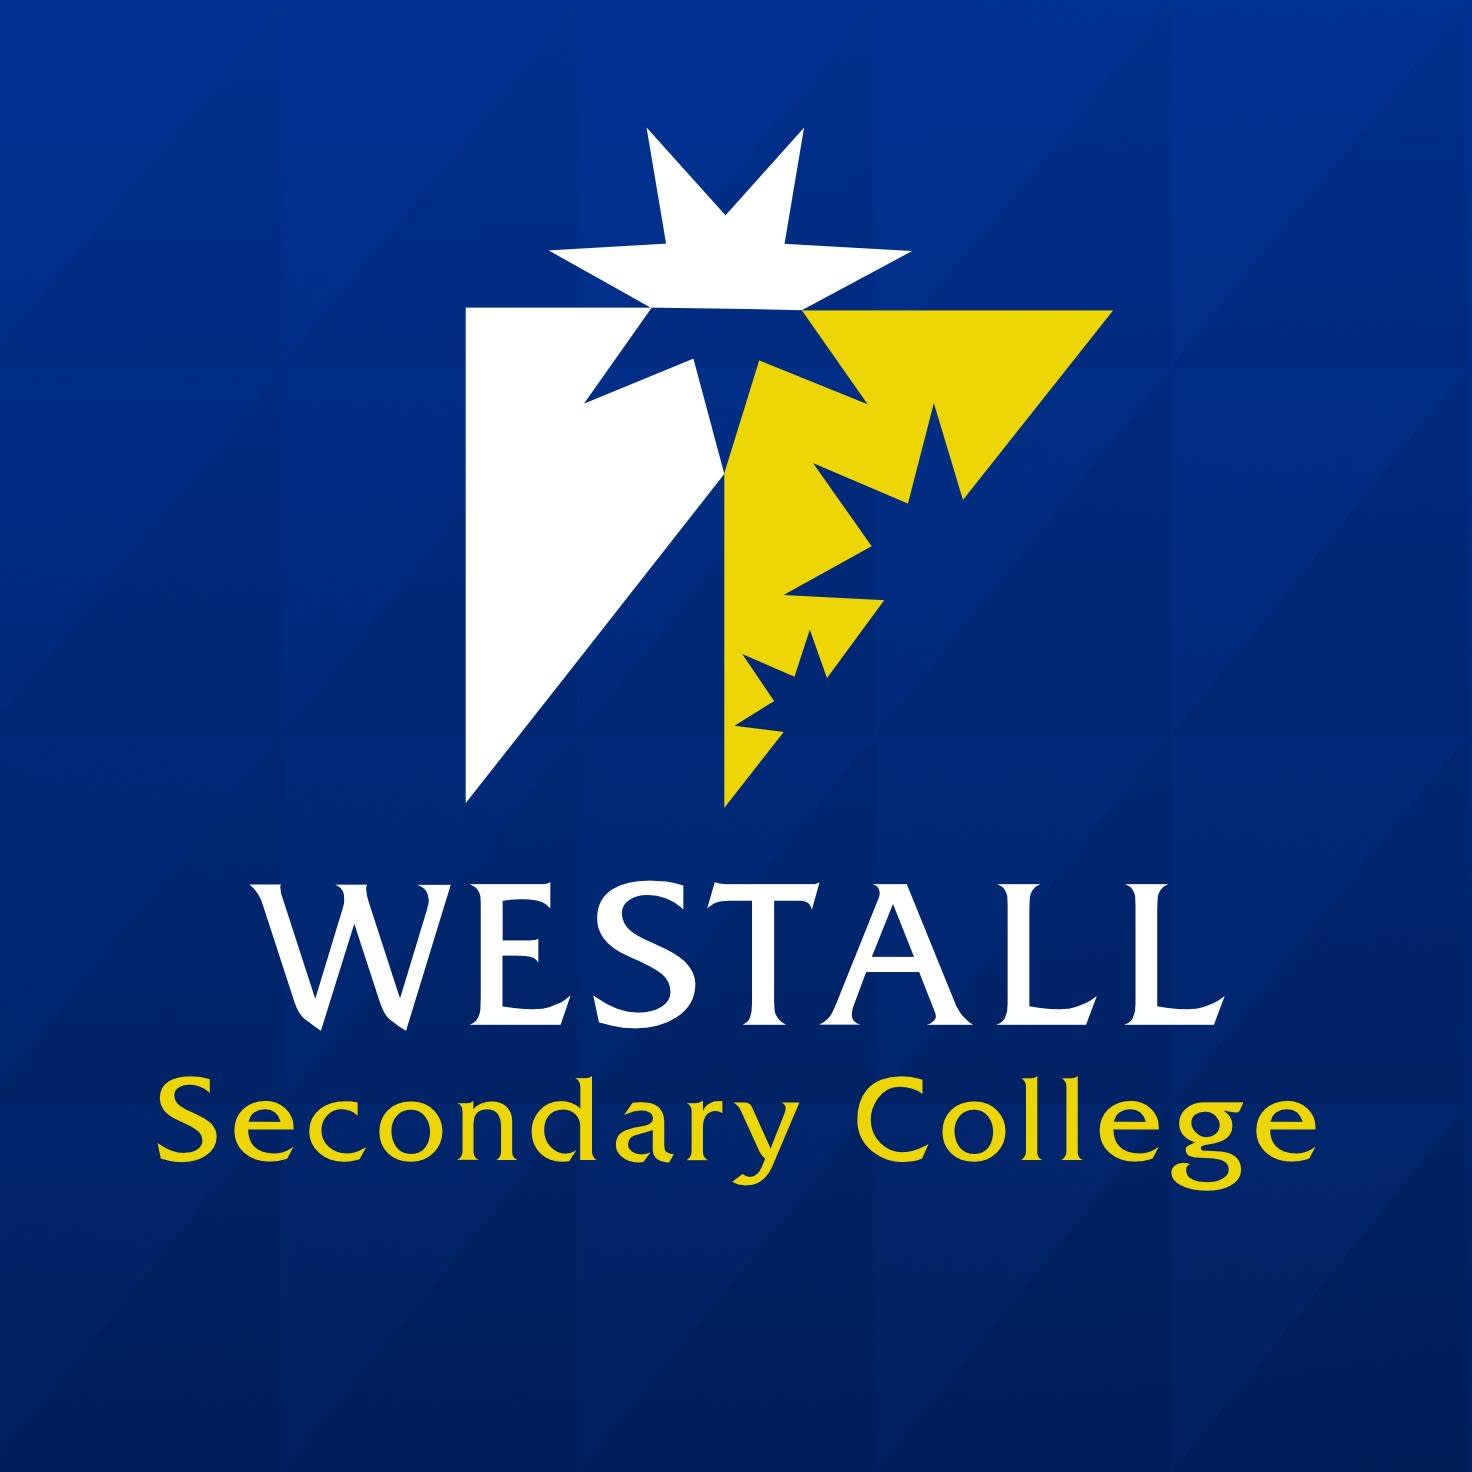 Westall Secondary College